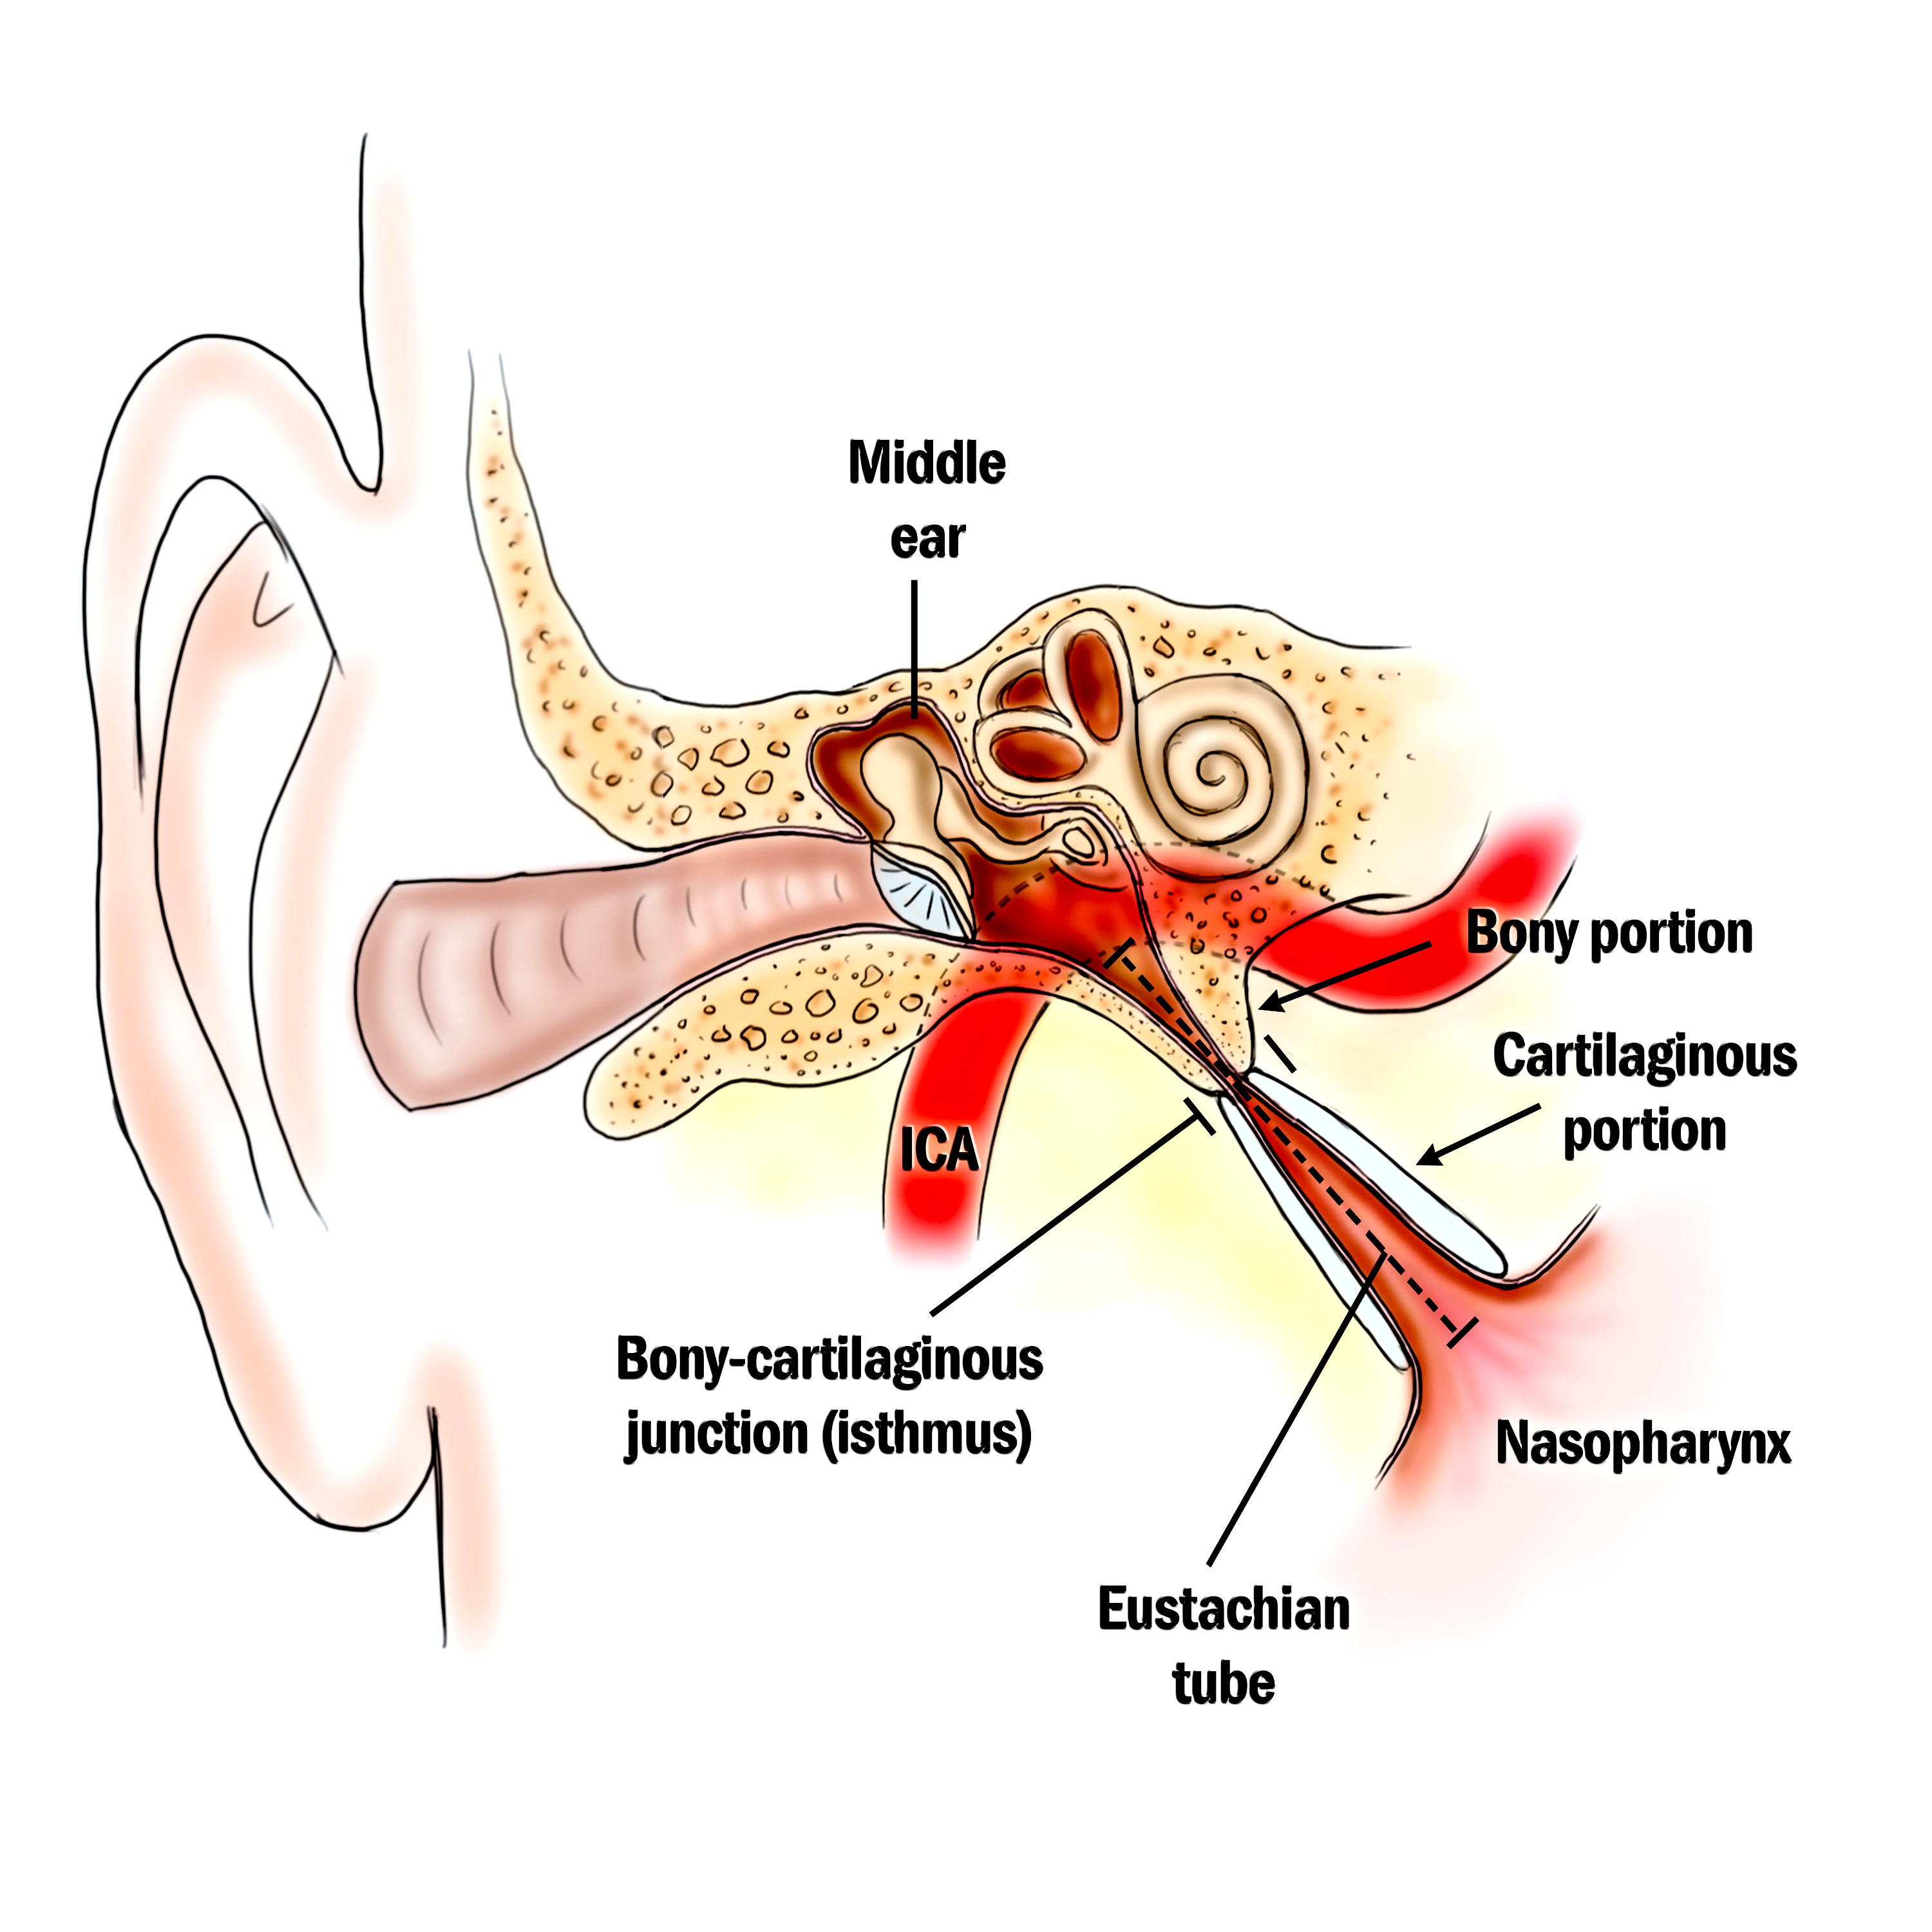 valve of the Eustachian tube to open and/or close properly ETD  (Eustachian tube dysfunction) is estimated to effect up to 5-15% of the  adult population.